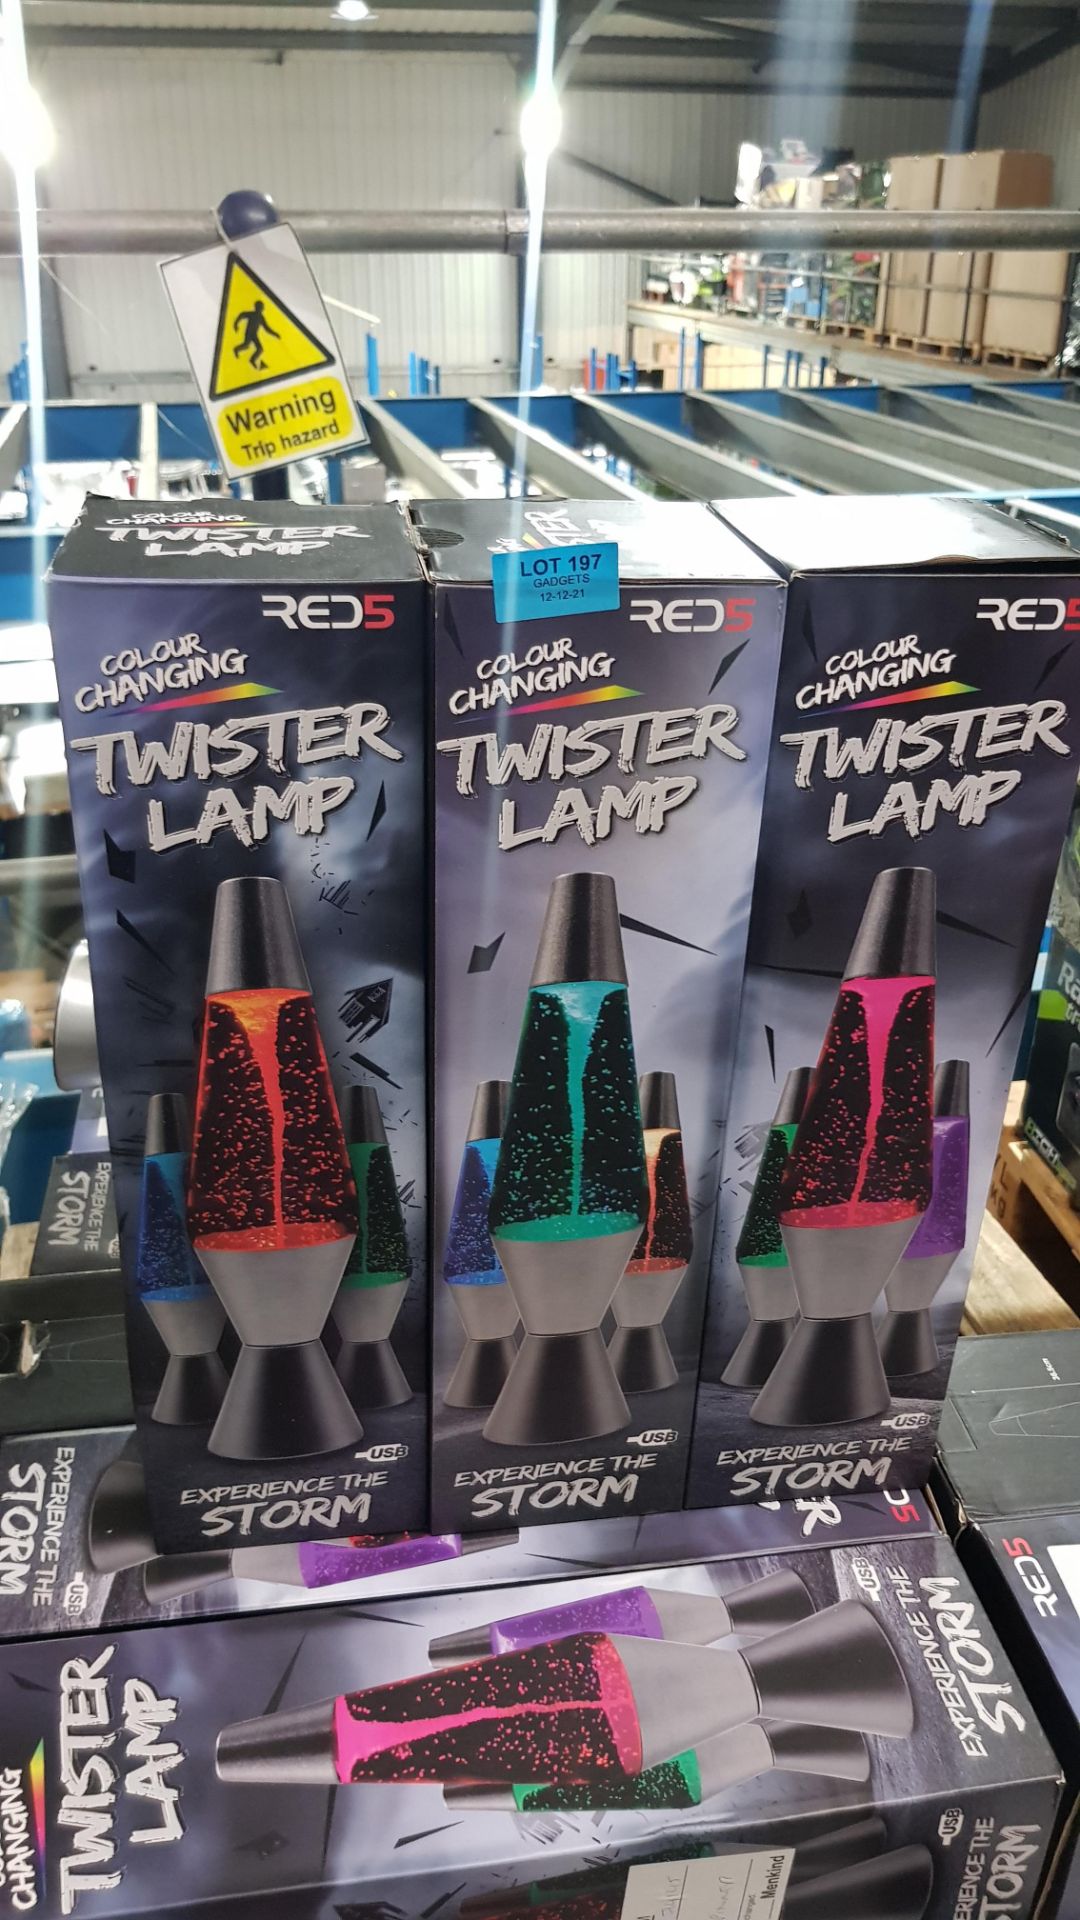 7x Red5 Colour Changing Twister Lamp RRP £19.99 Each. (Units Have Return To Manufacturer Sticker). - Image 3 of 3